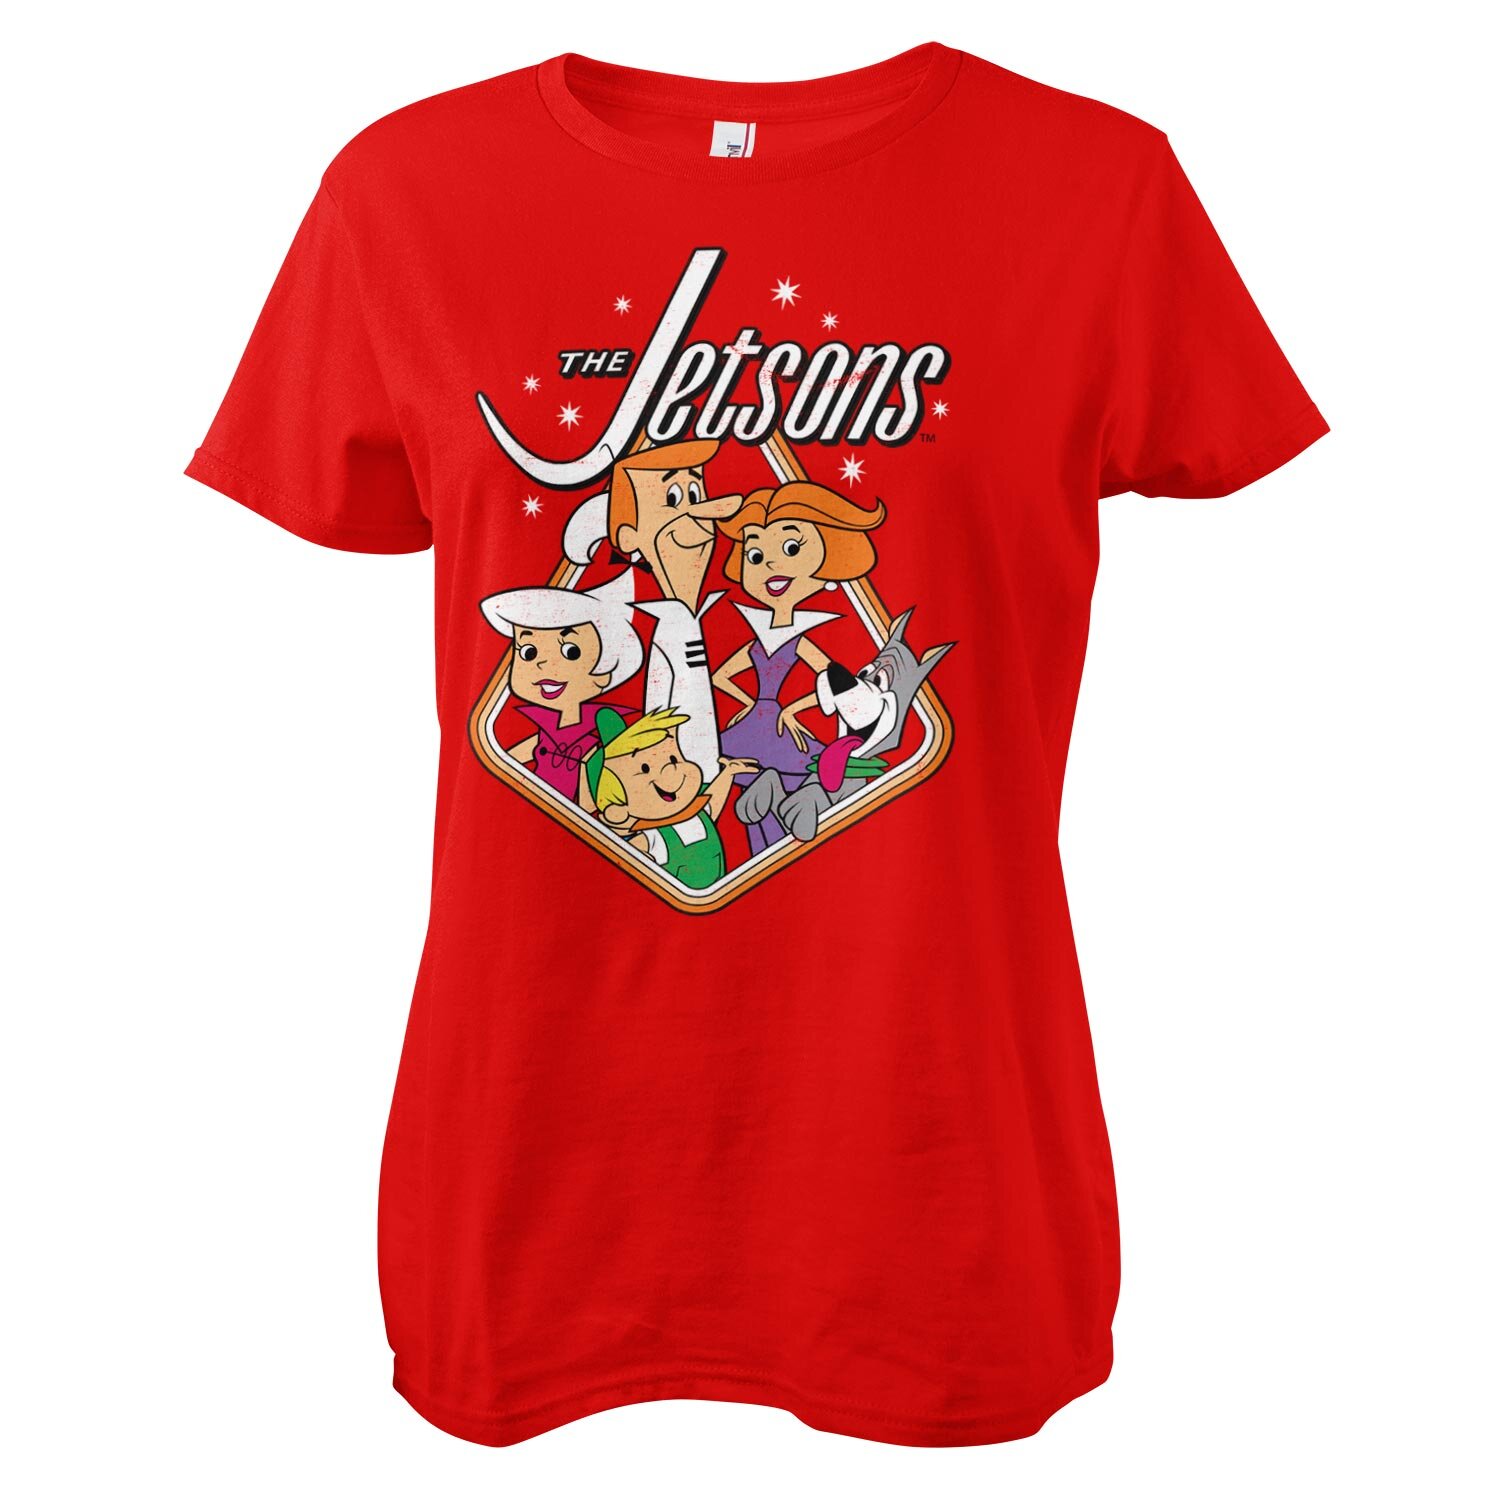 The Jetsons Family Girly Tee